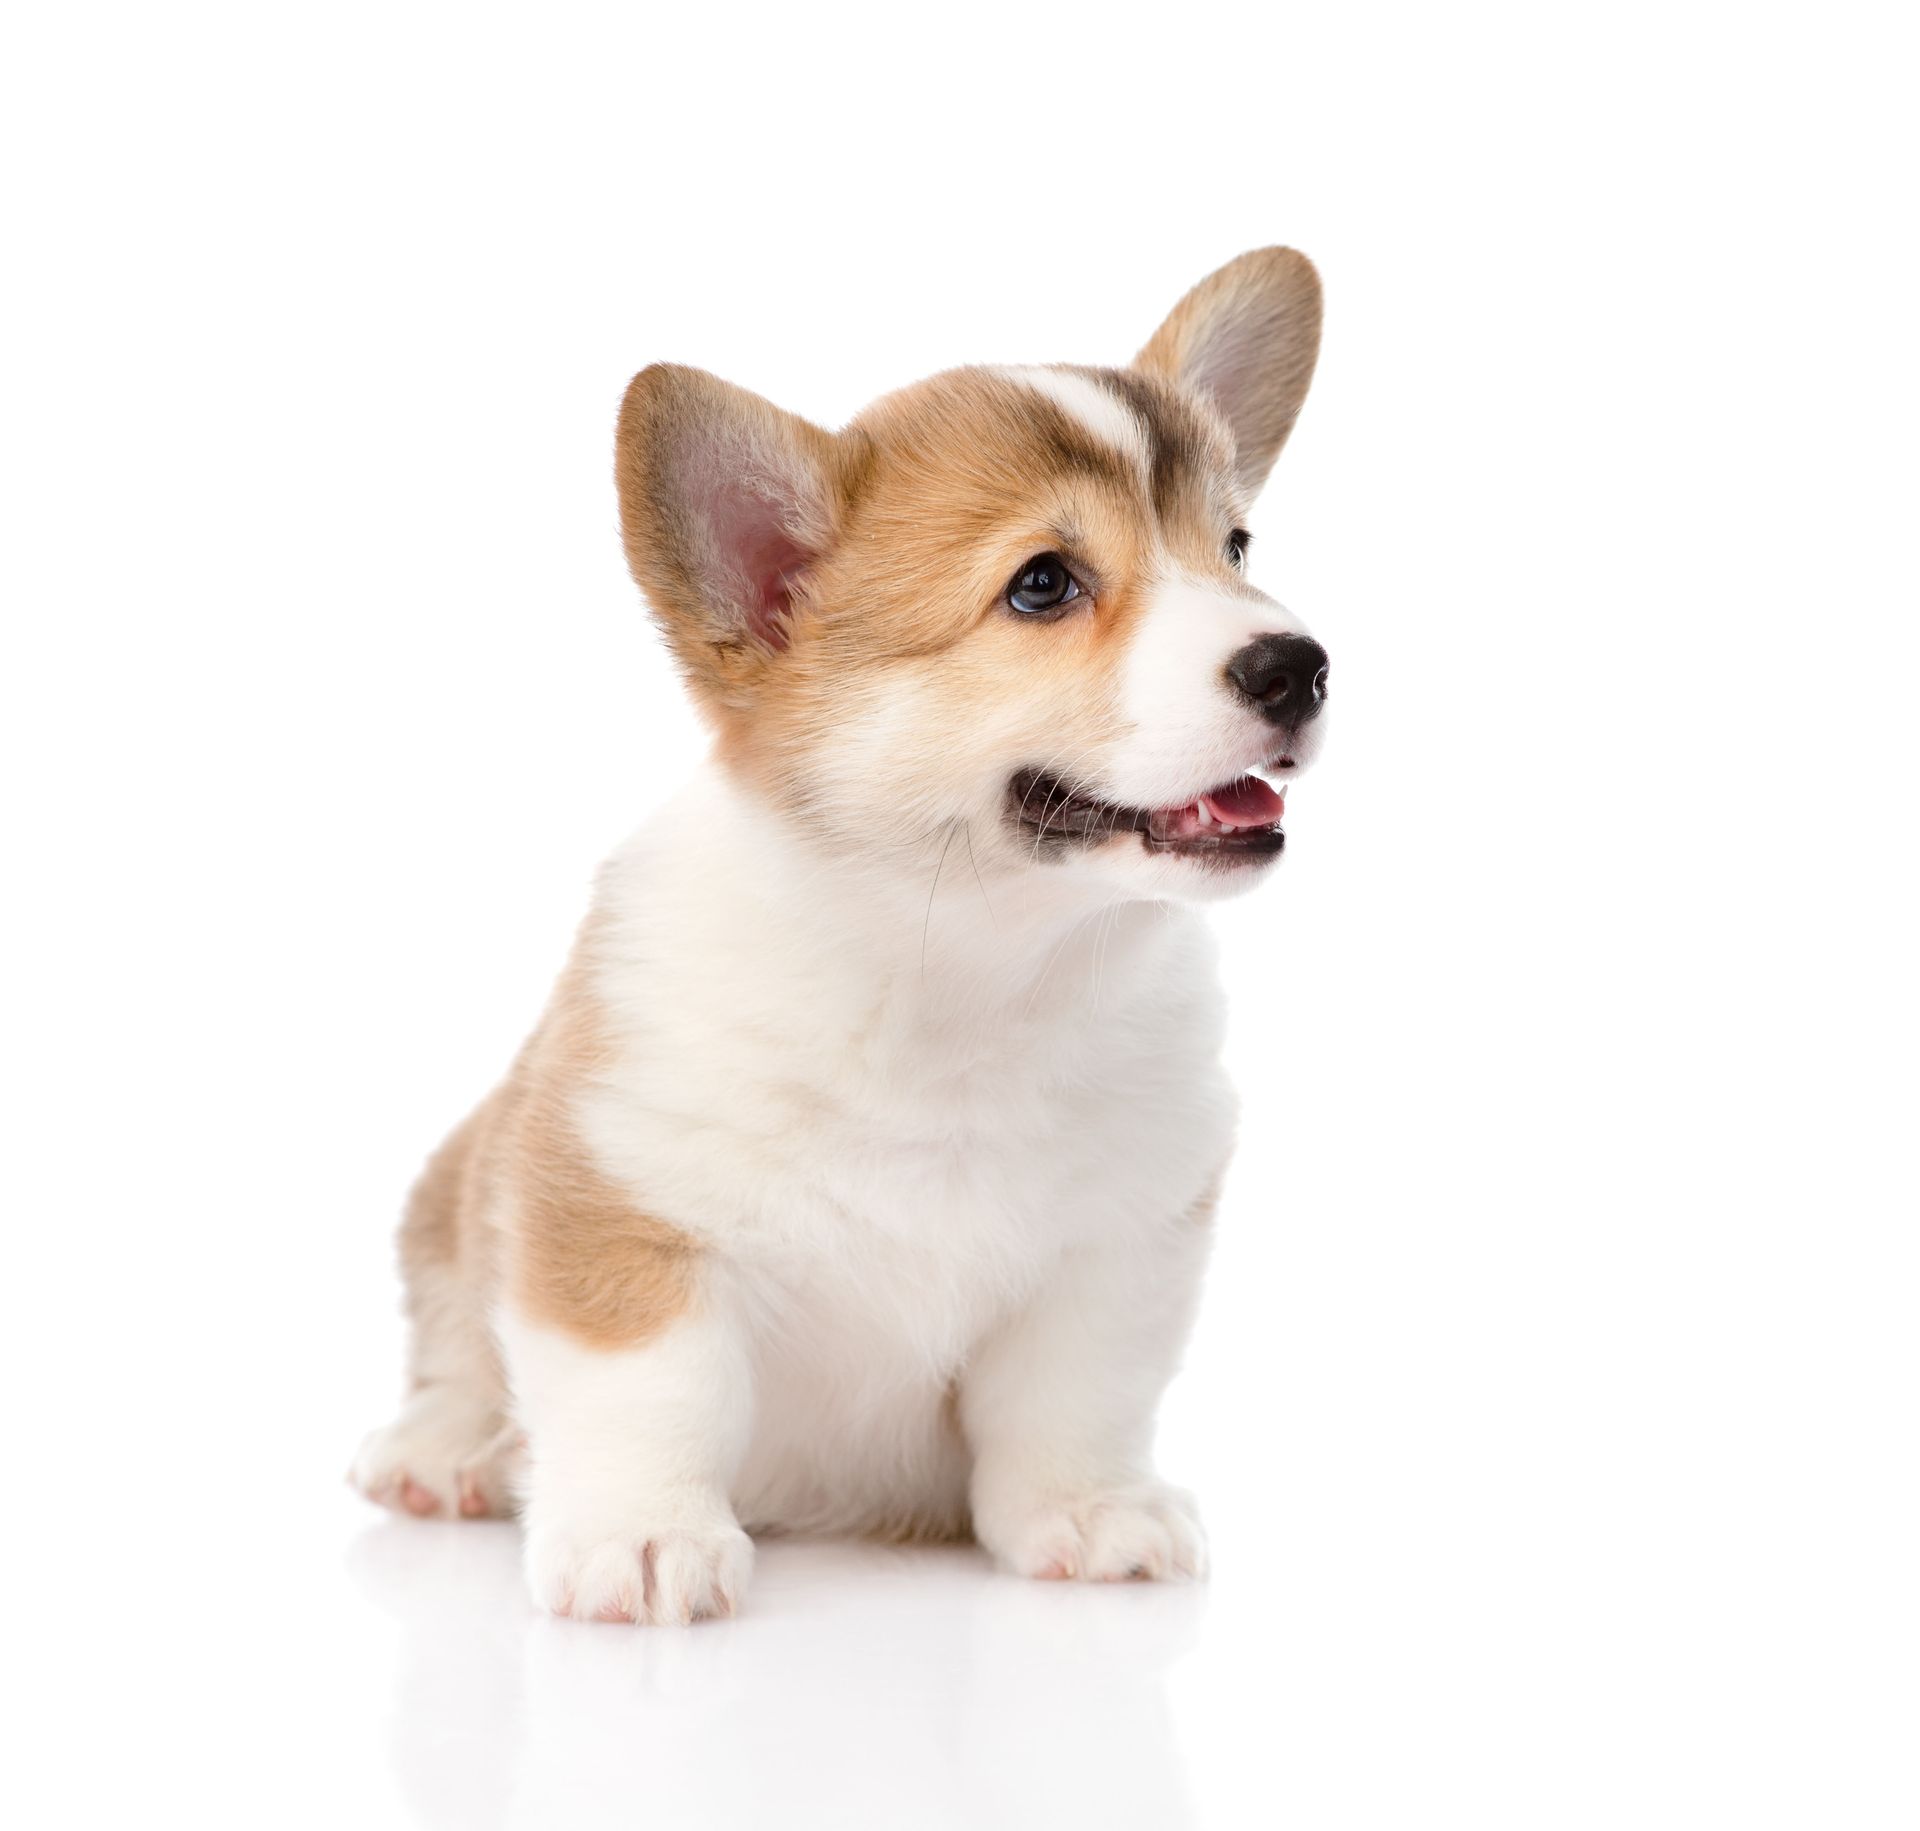 a brown and white corgi puppy is sitting on a white surface and looking up .